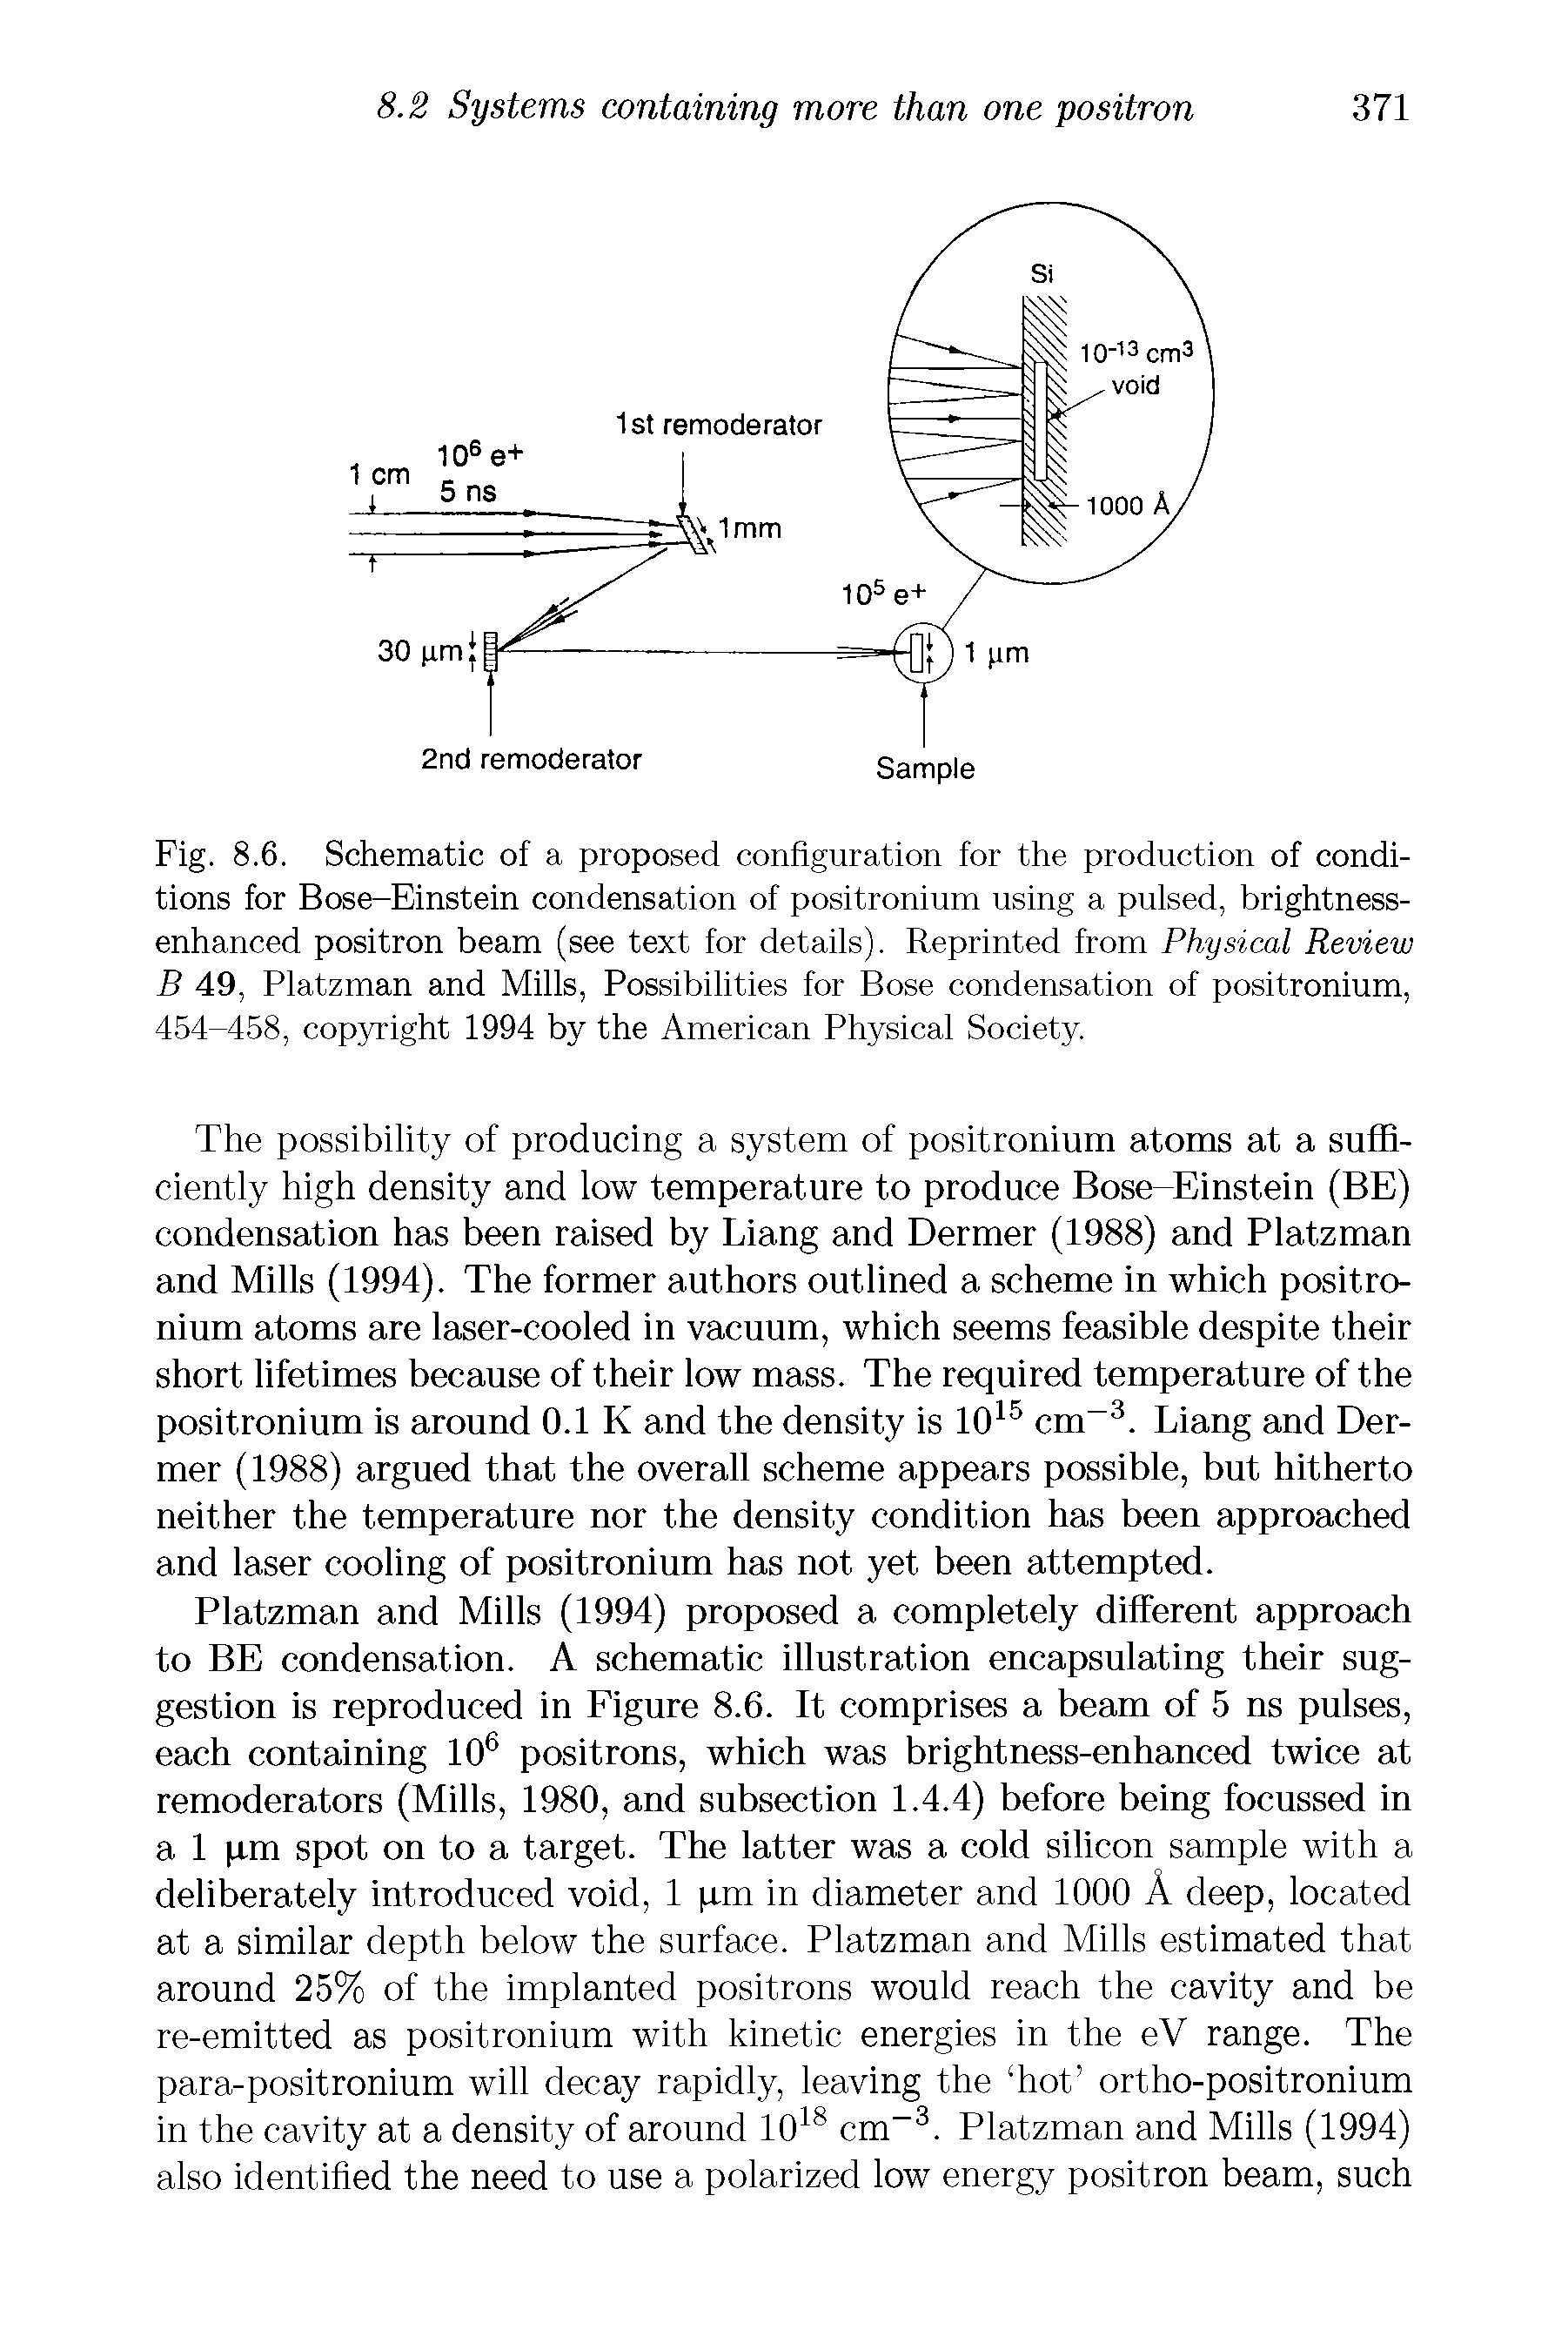 Fig. 8.6. Schematic of a proposed configuration for the production of conditions for Bose-Einstein condensation of positronium using a pulsed, brightness-enhanced positron beam (see text for details). Reprinted from Physical Review B 49, Platzman and Mills, Possibilities for Bose condensation of positronium, 454-458, copyright 1994 by the American Physical Society.